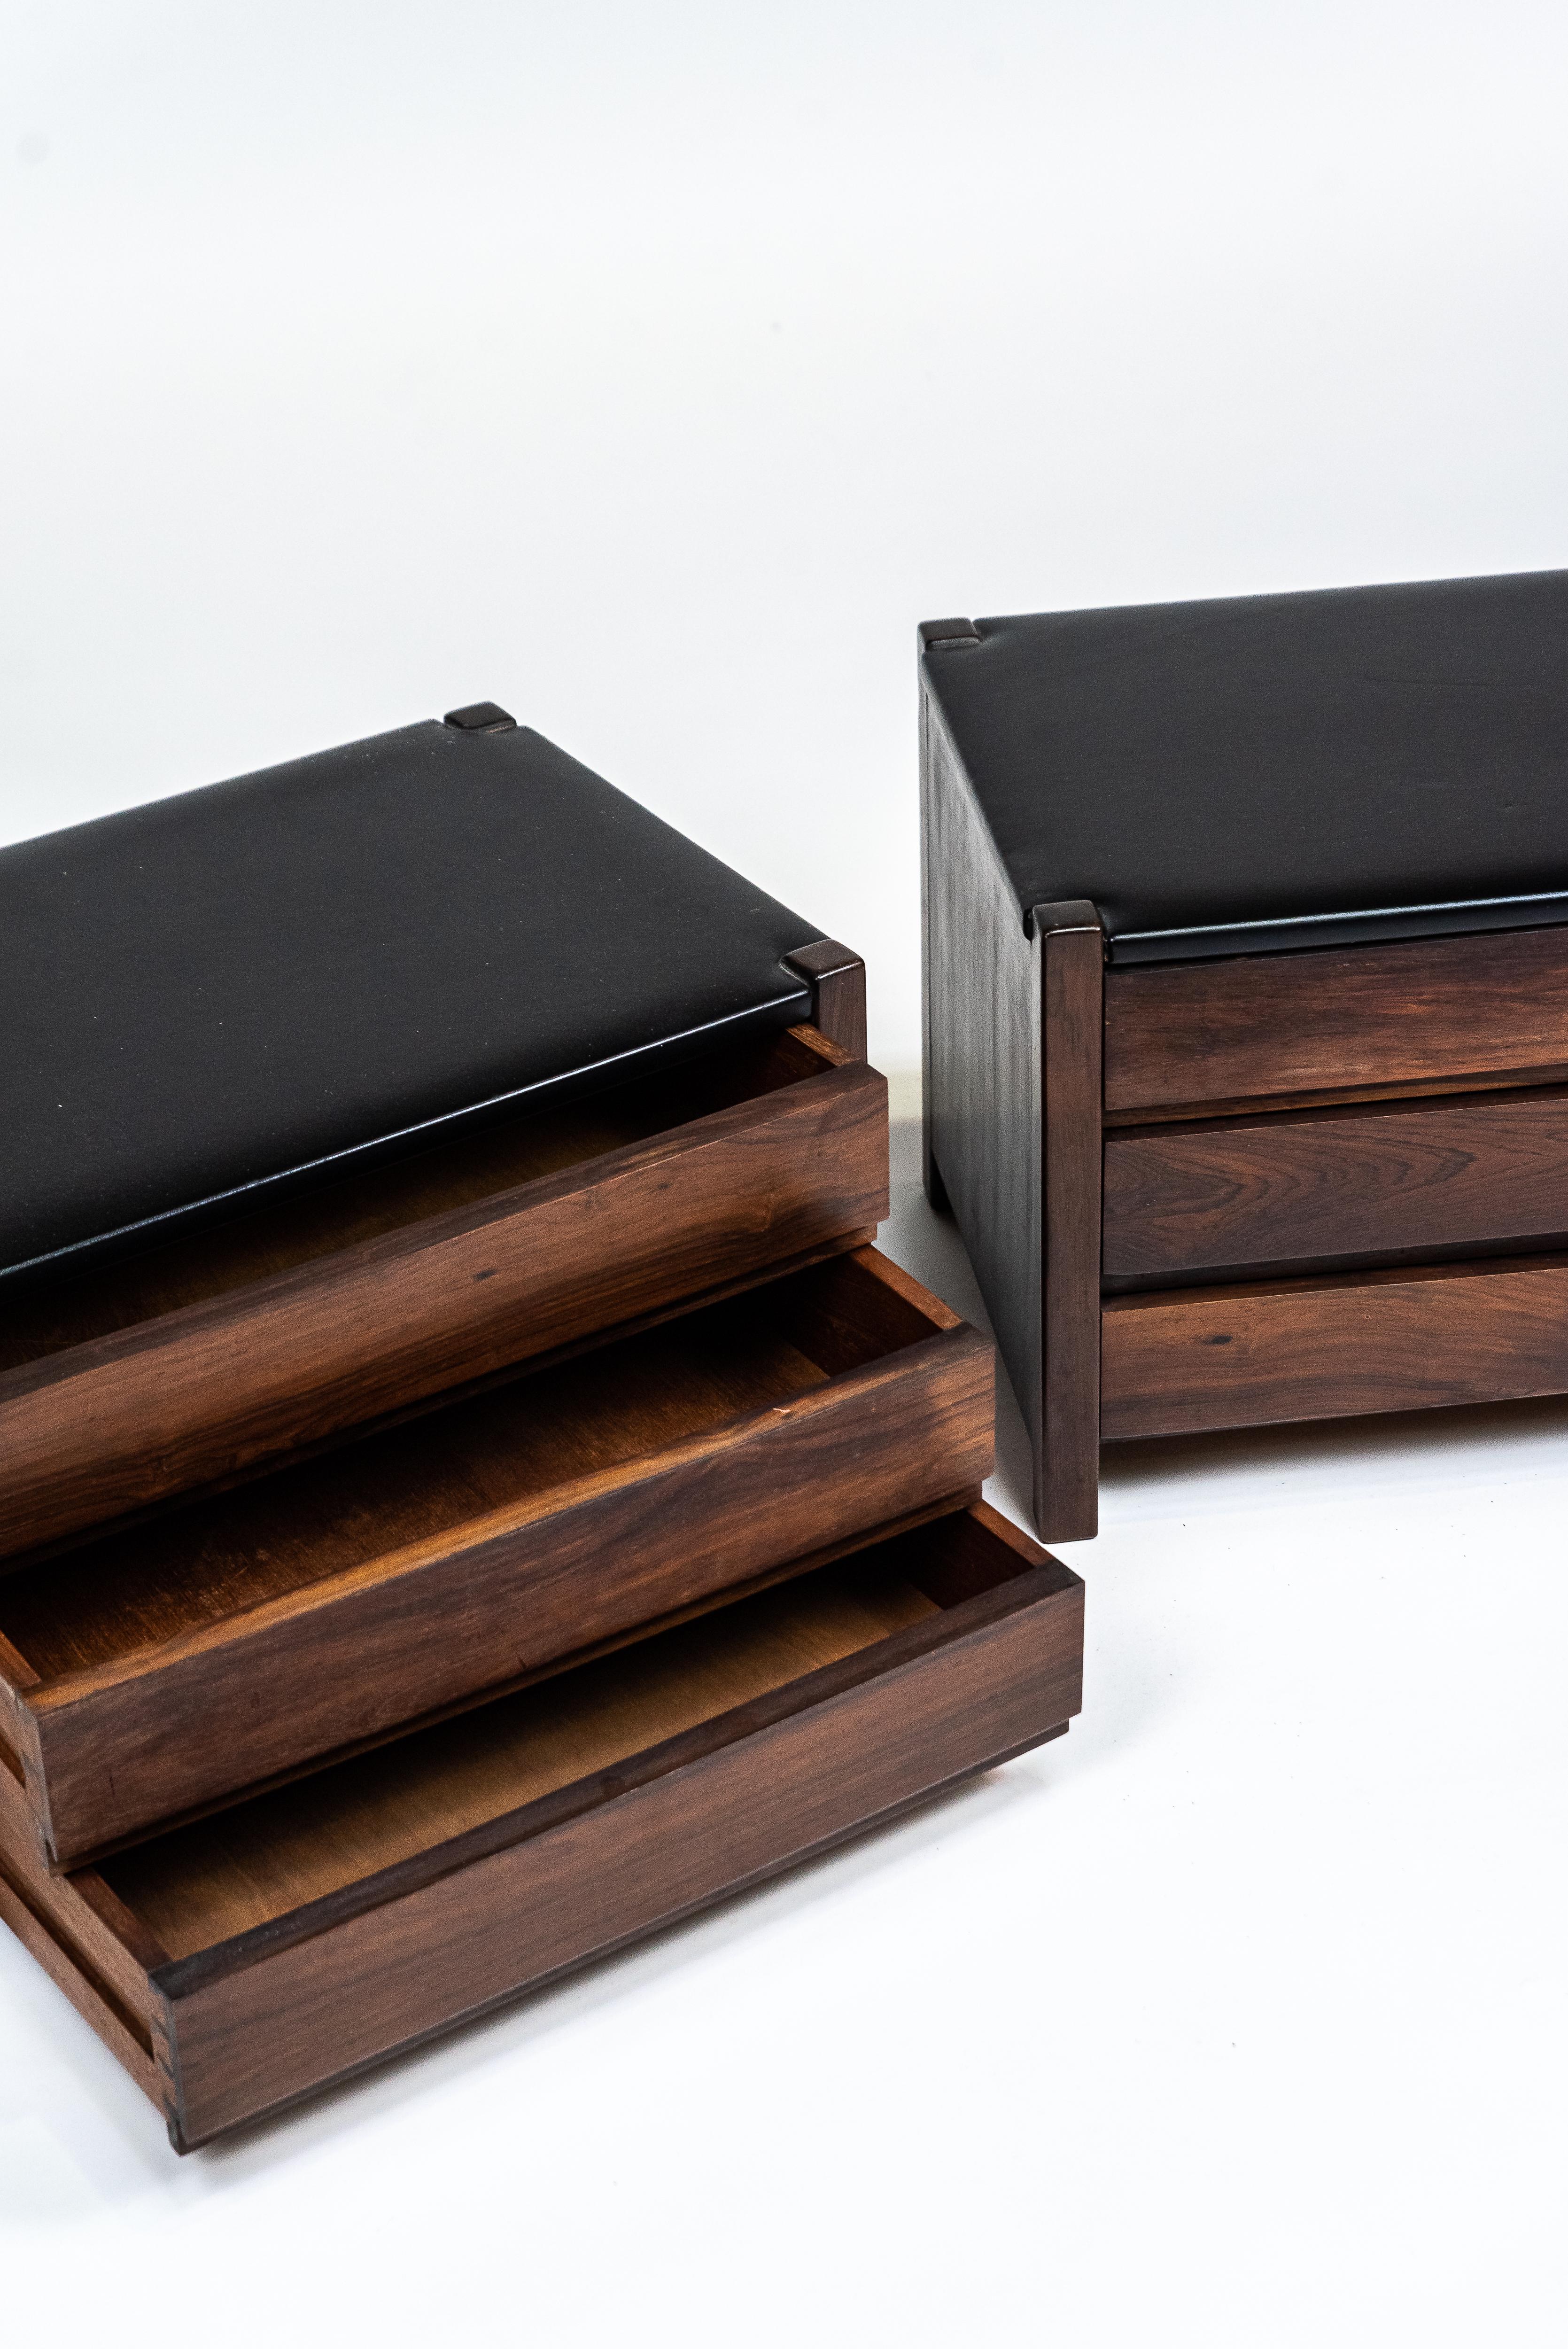 This pair of bedside tables presents the typical characteristics that have made the reputation of Sergio Rodrigues, 